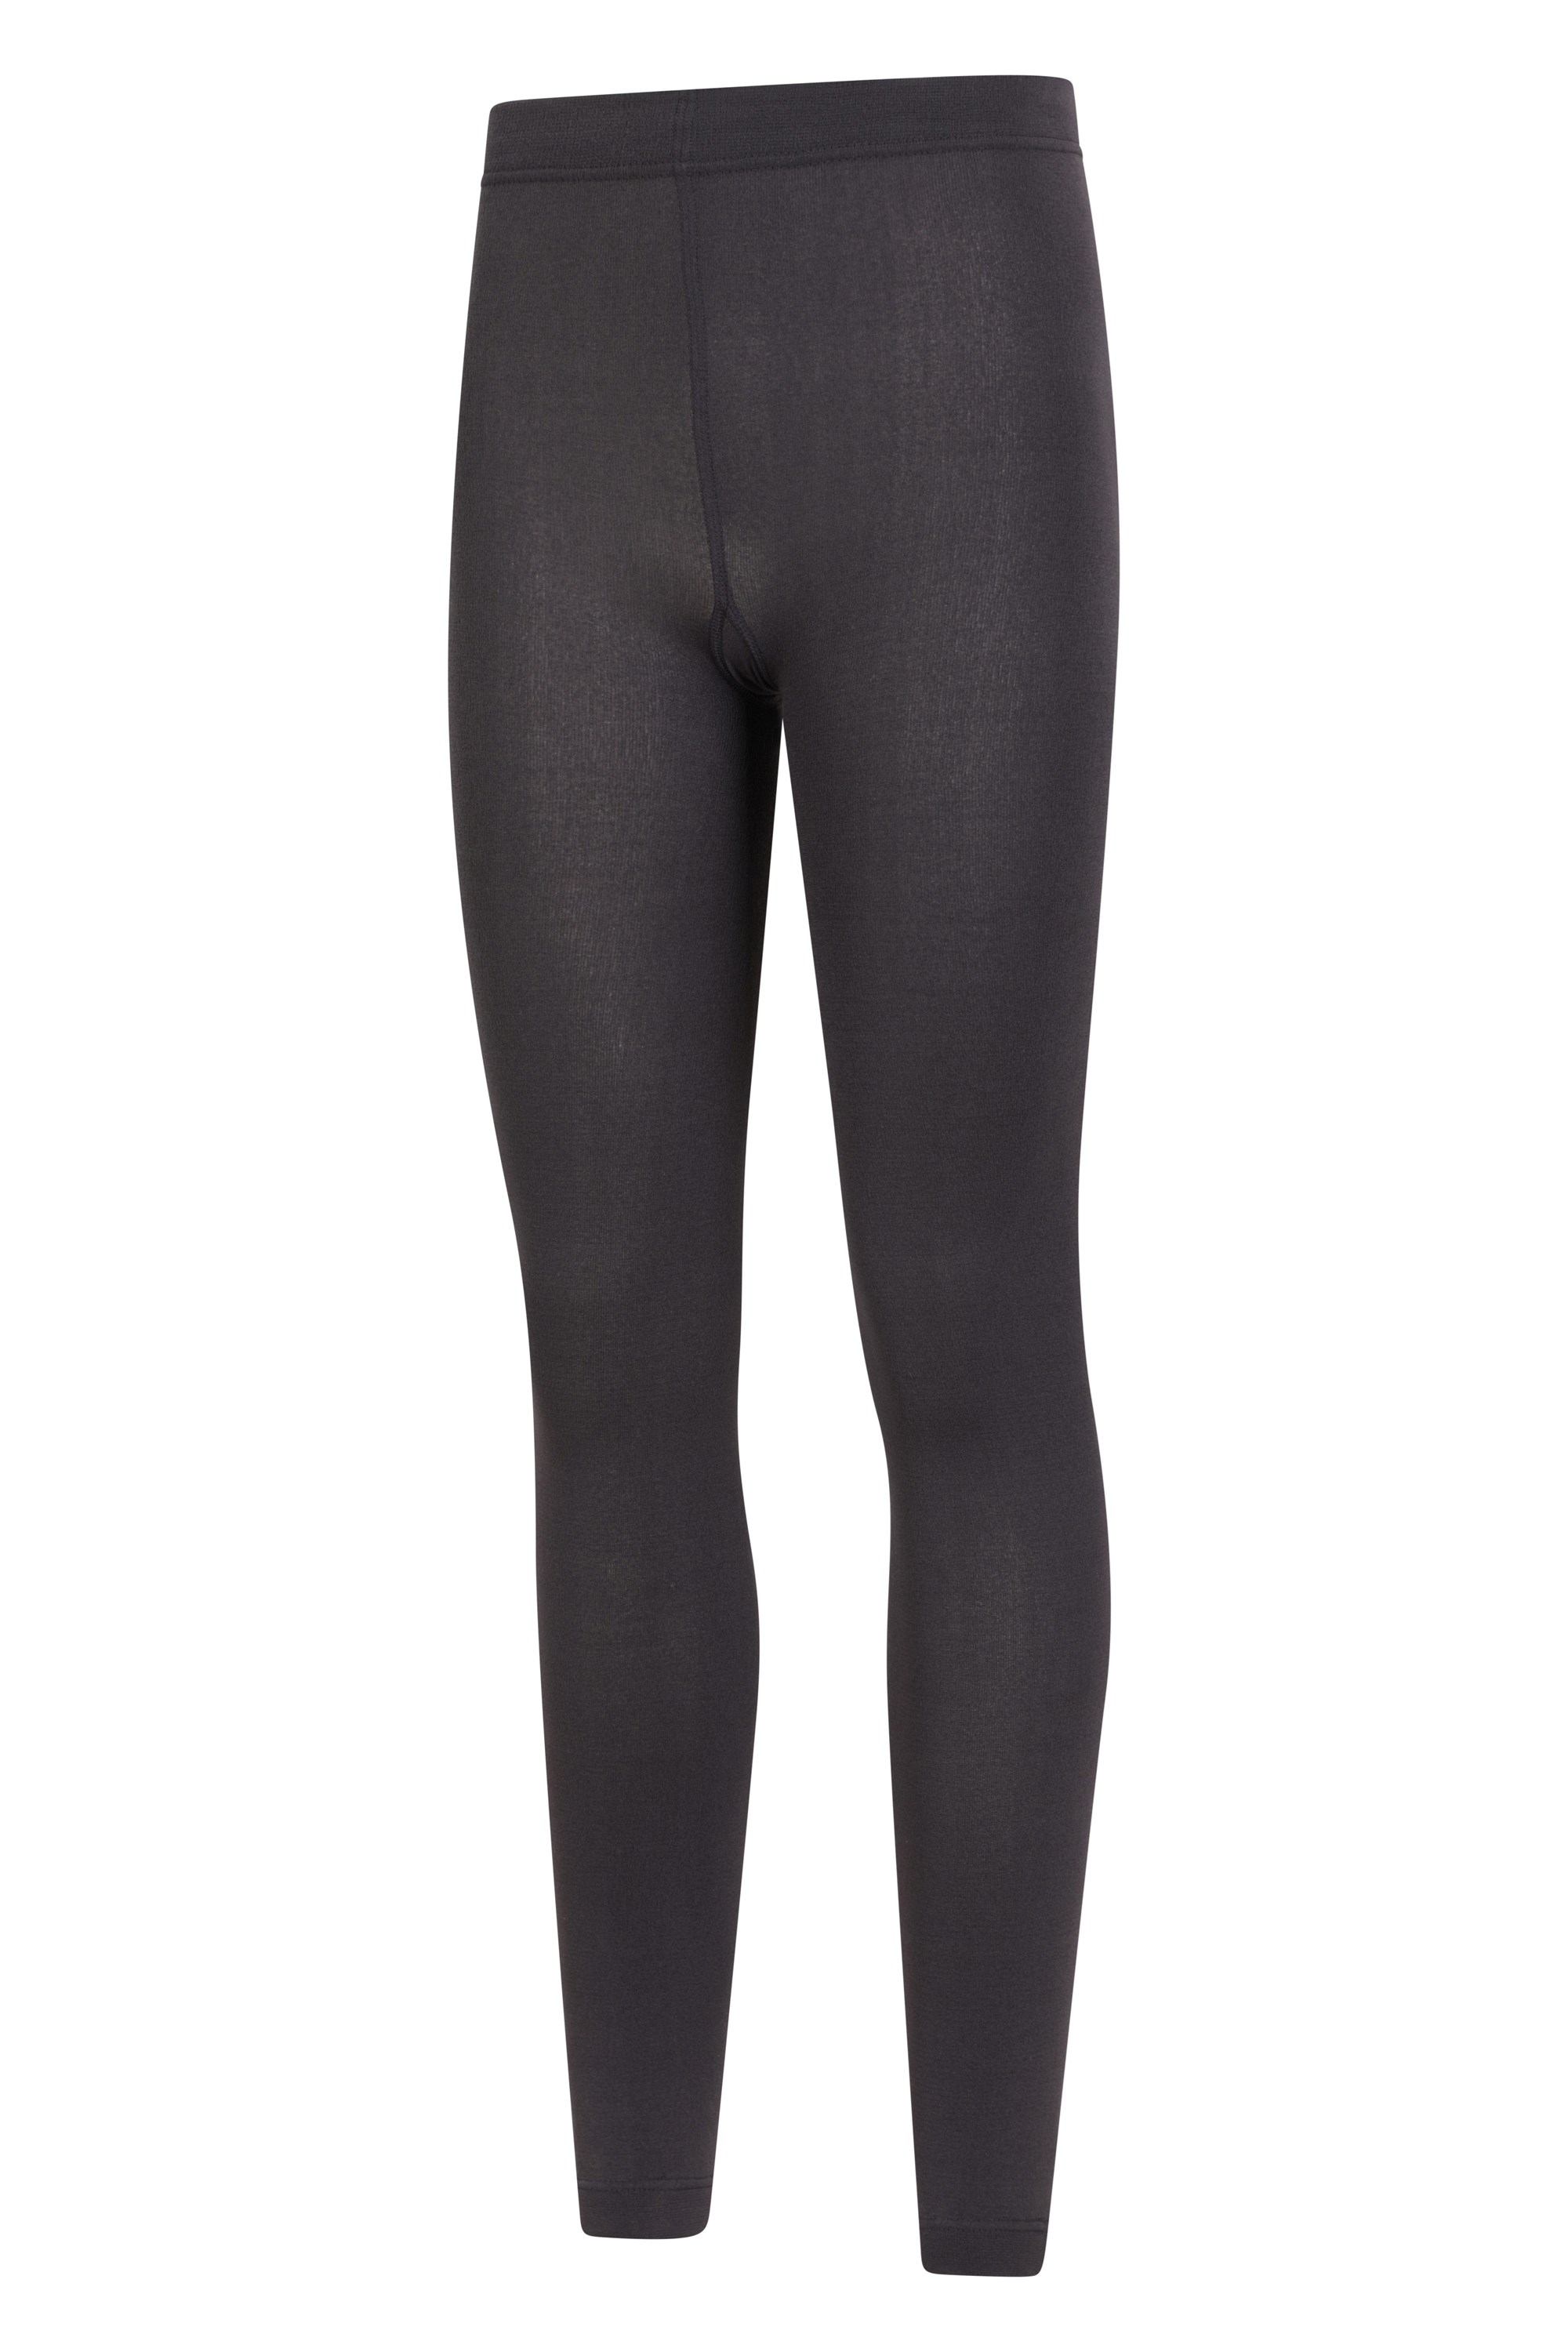 https://img.cdn.mountainwarehouse.com/product/032132/032132_gre_isotherm_womens_thermal_brushed_leggings_wms_aw23_03.jpg